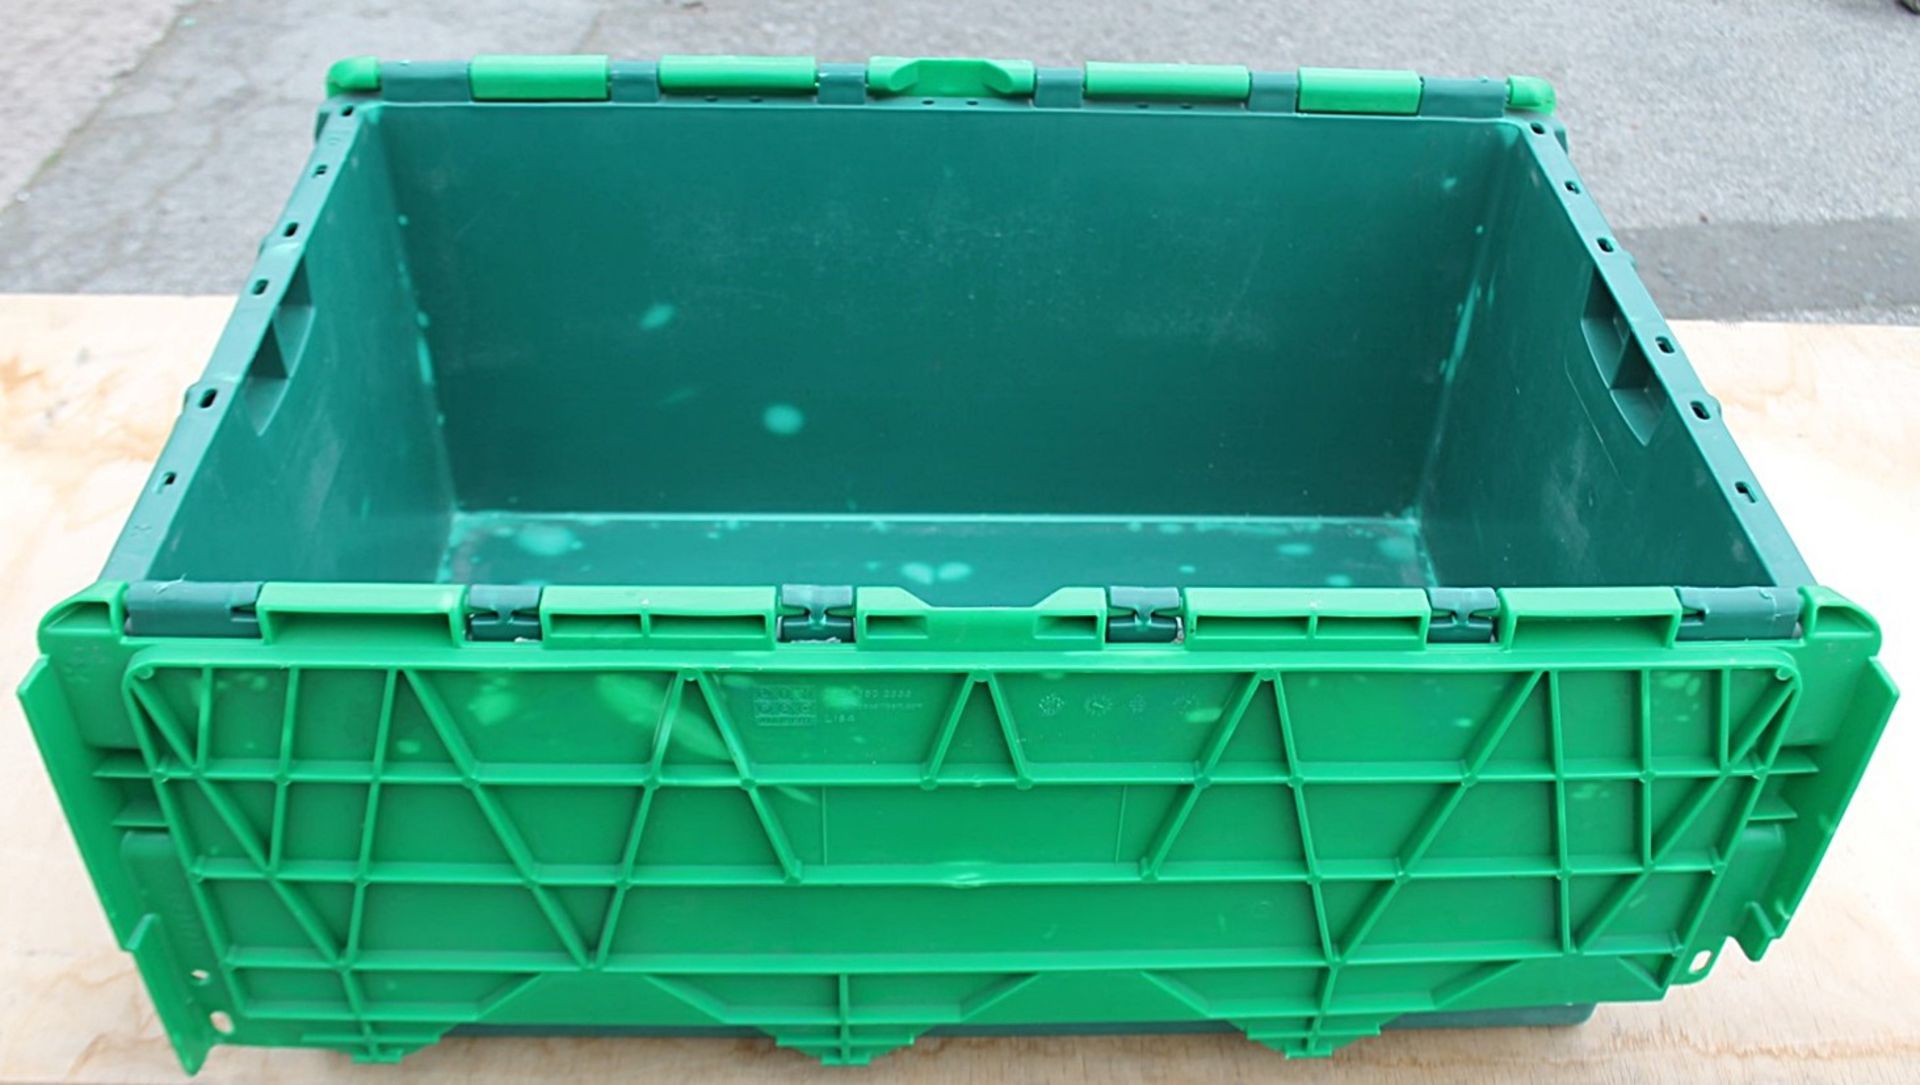 20 x Robust Low Profile Green Plastic Secure Storage Boxes With Attached Hinged Lids - Dimensions: - Image 2 of 5